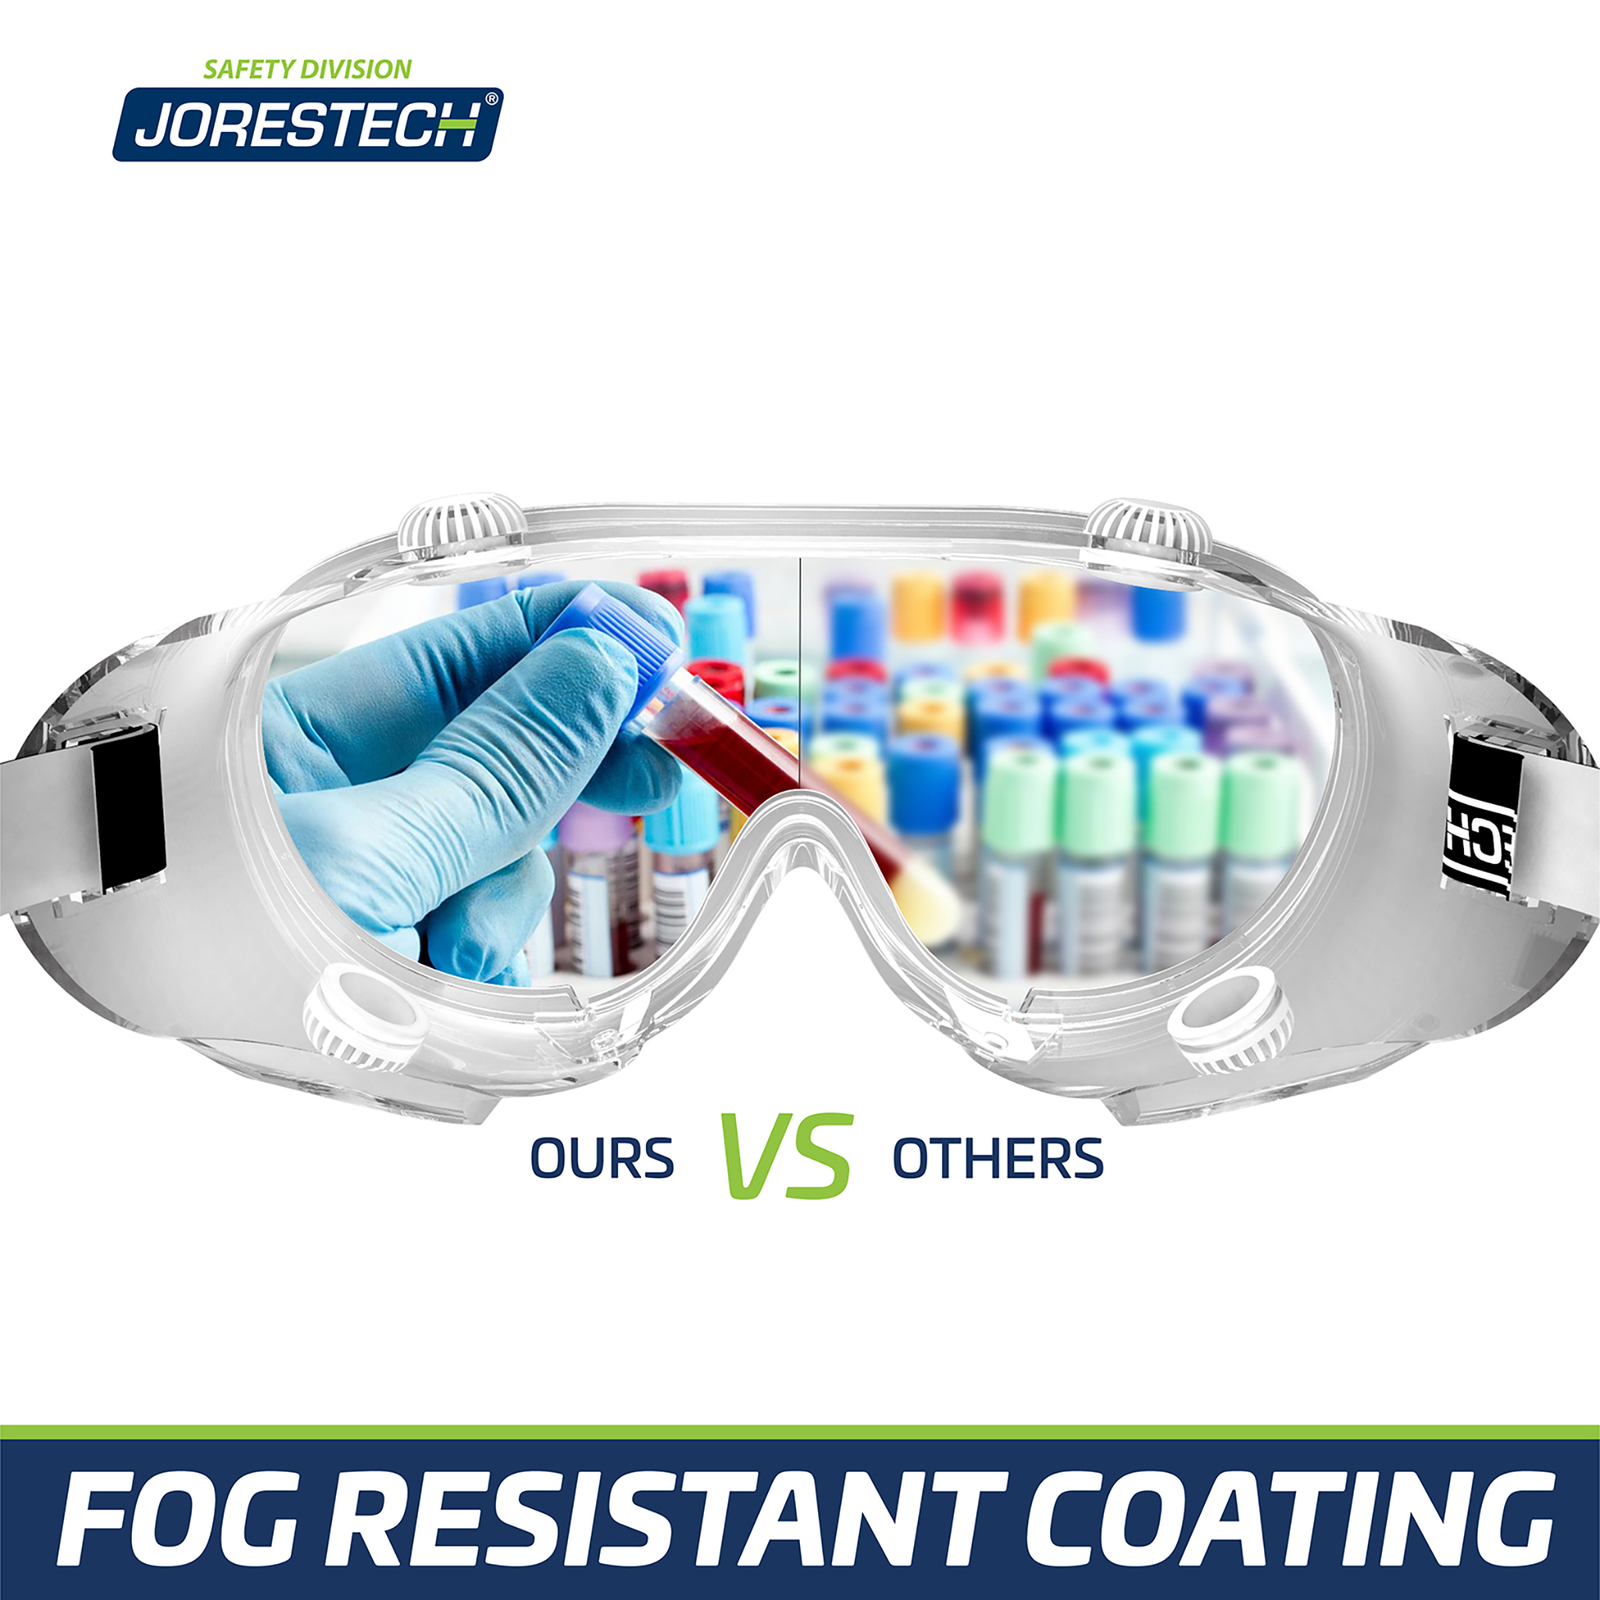 Features 2 sides of the goggles to make a comparison of the anti fog JORESTECH goggles versus others with no anti fog coating. The 